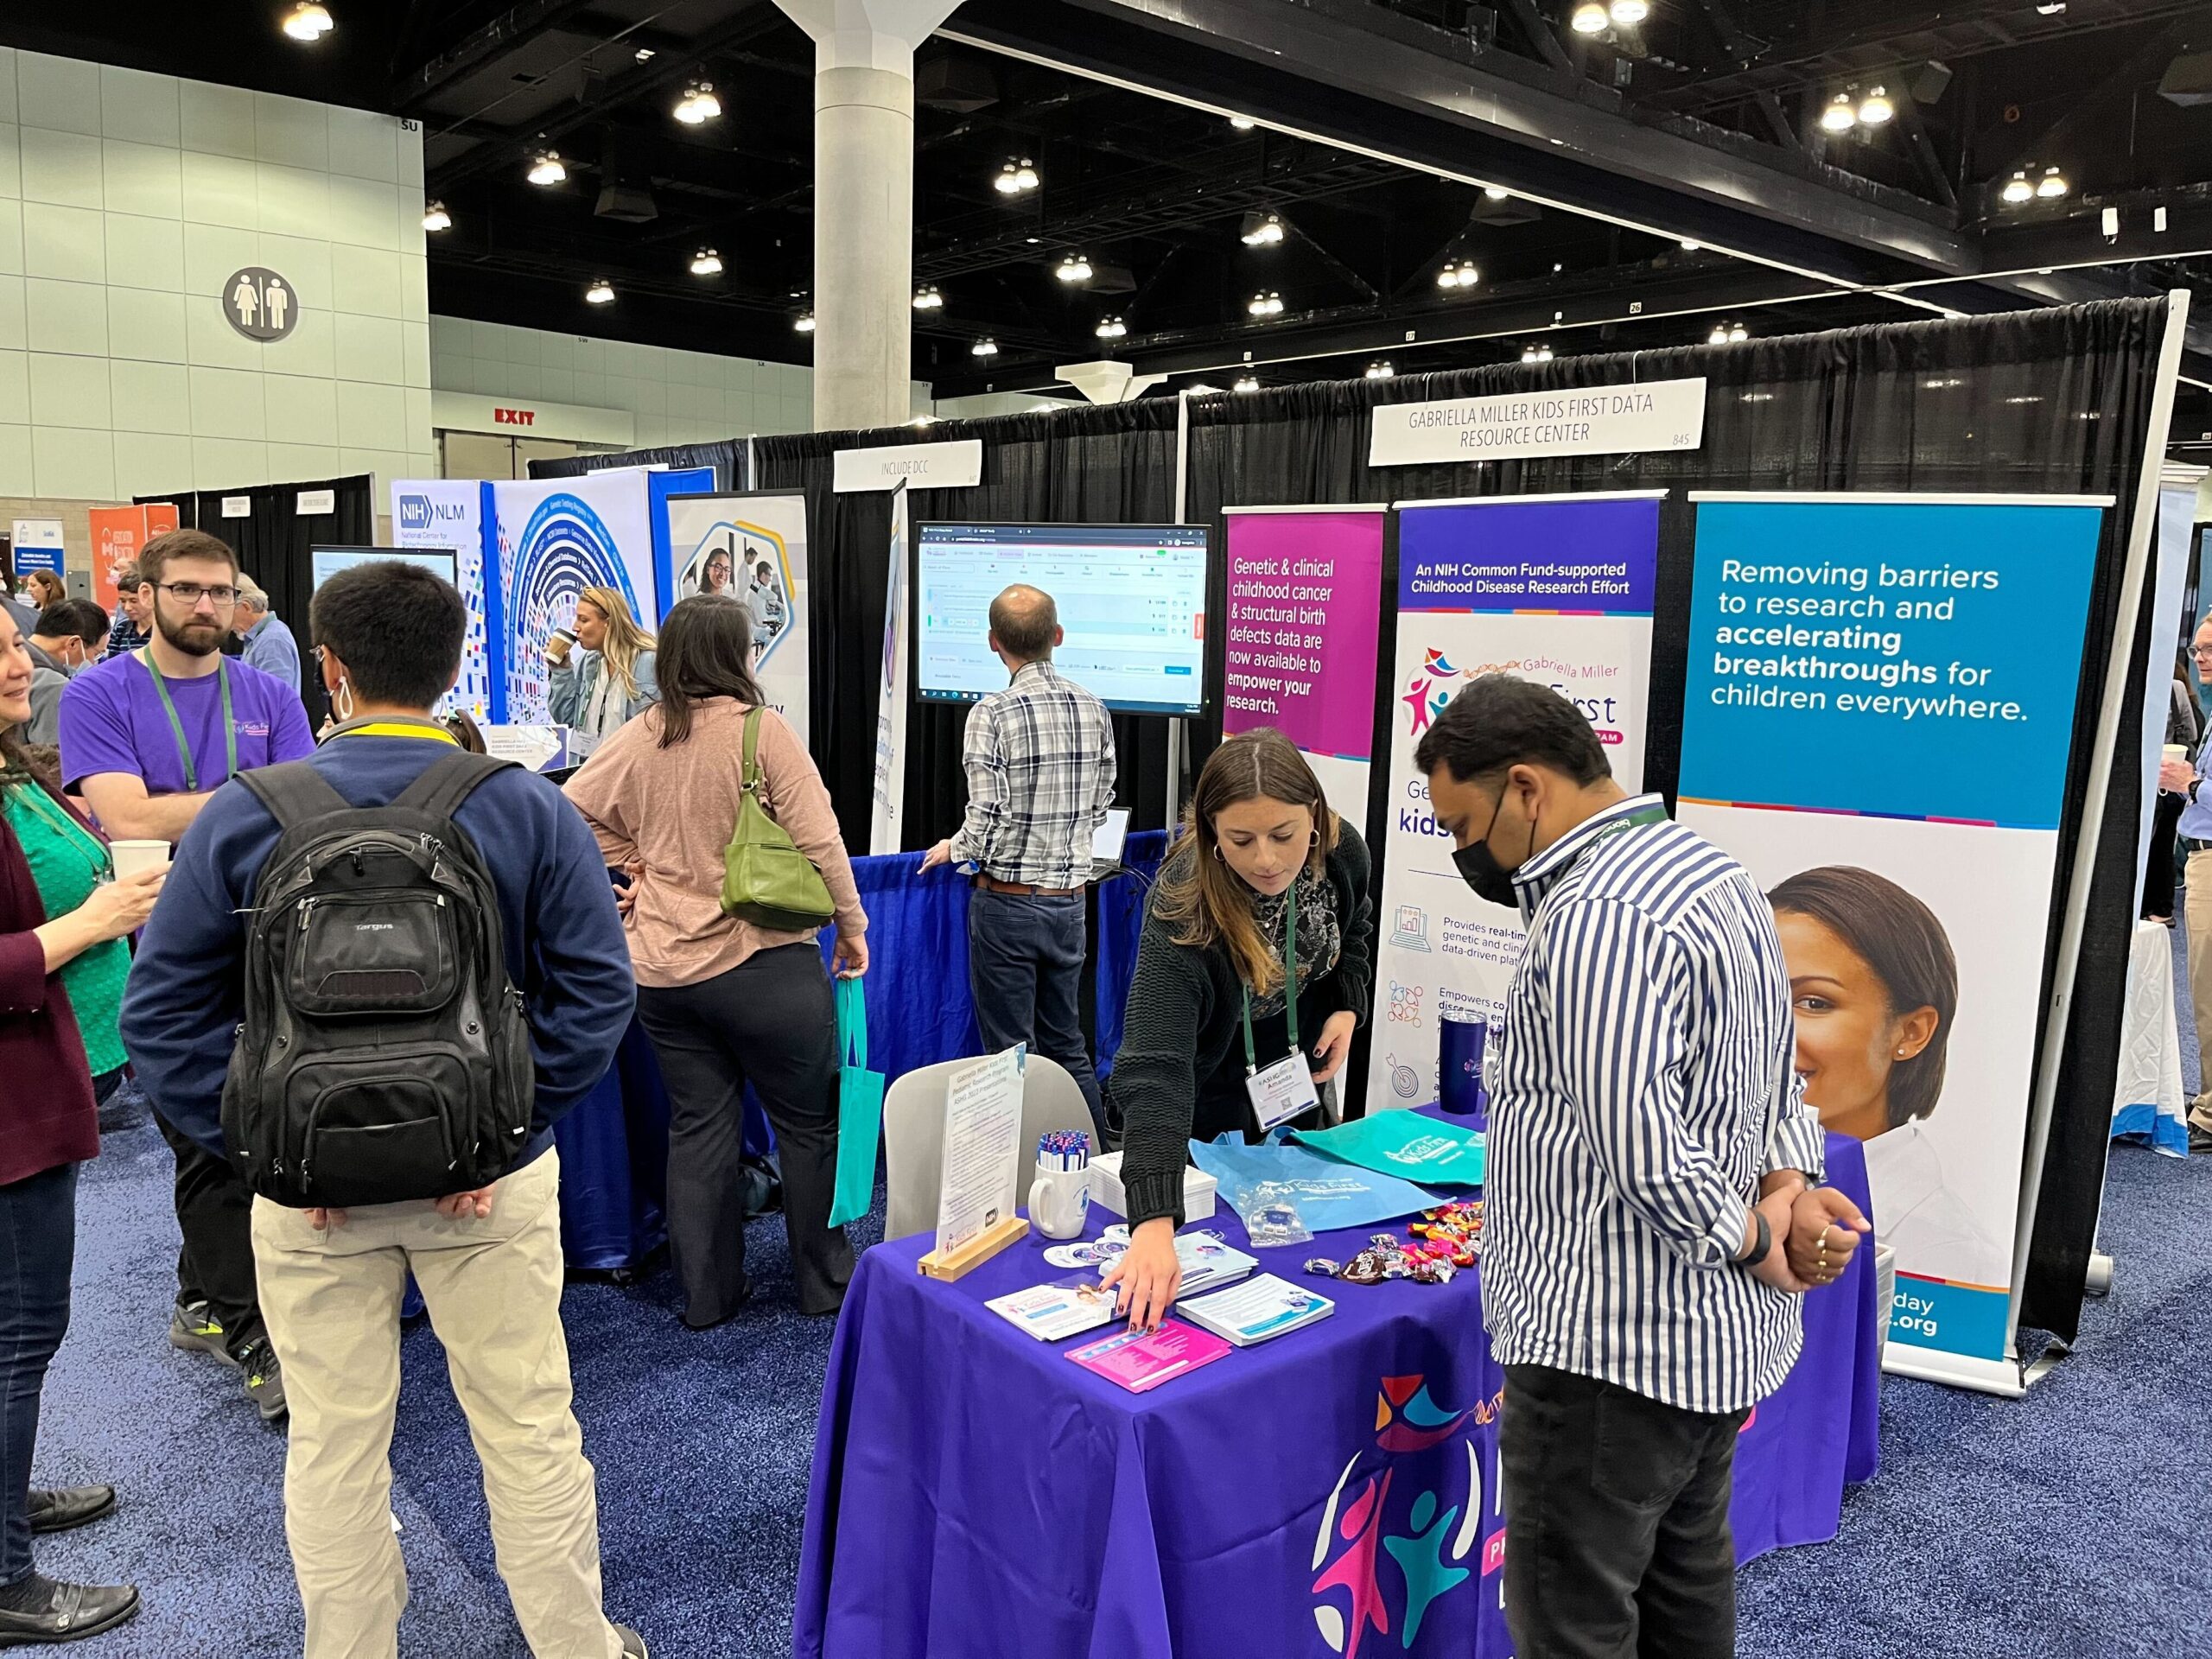 The Gabriella Miller Kids First DRC Partners with the NIH INCLUDE Project to Share Latest Research Breakthroughs at the 2022 ASHG Annual Meeting